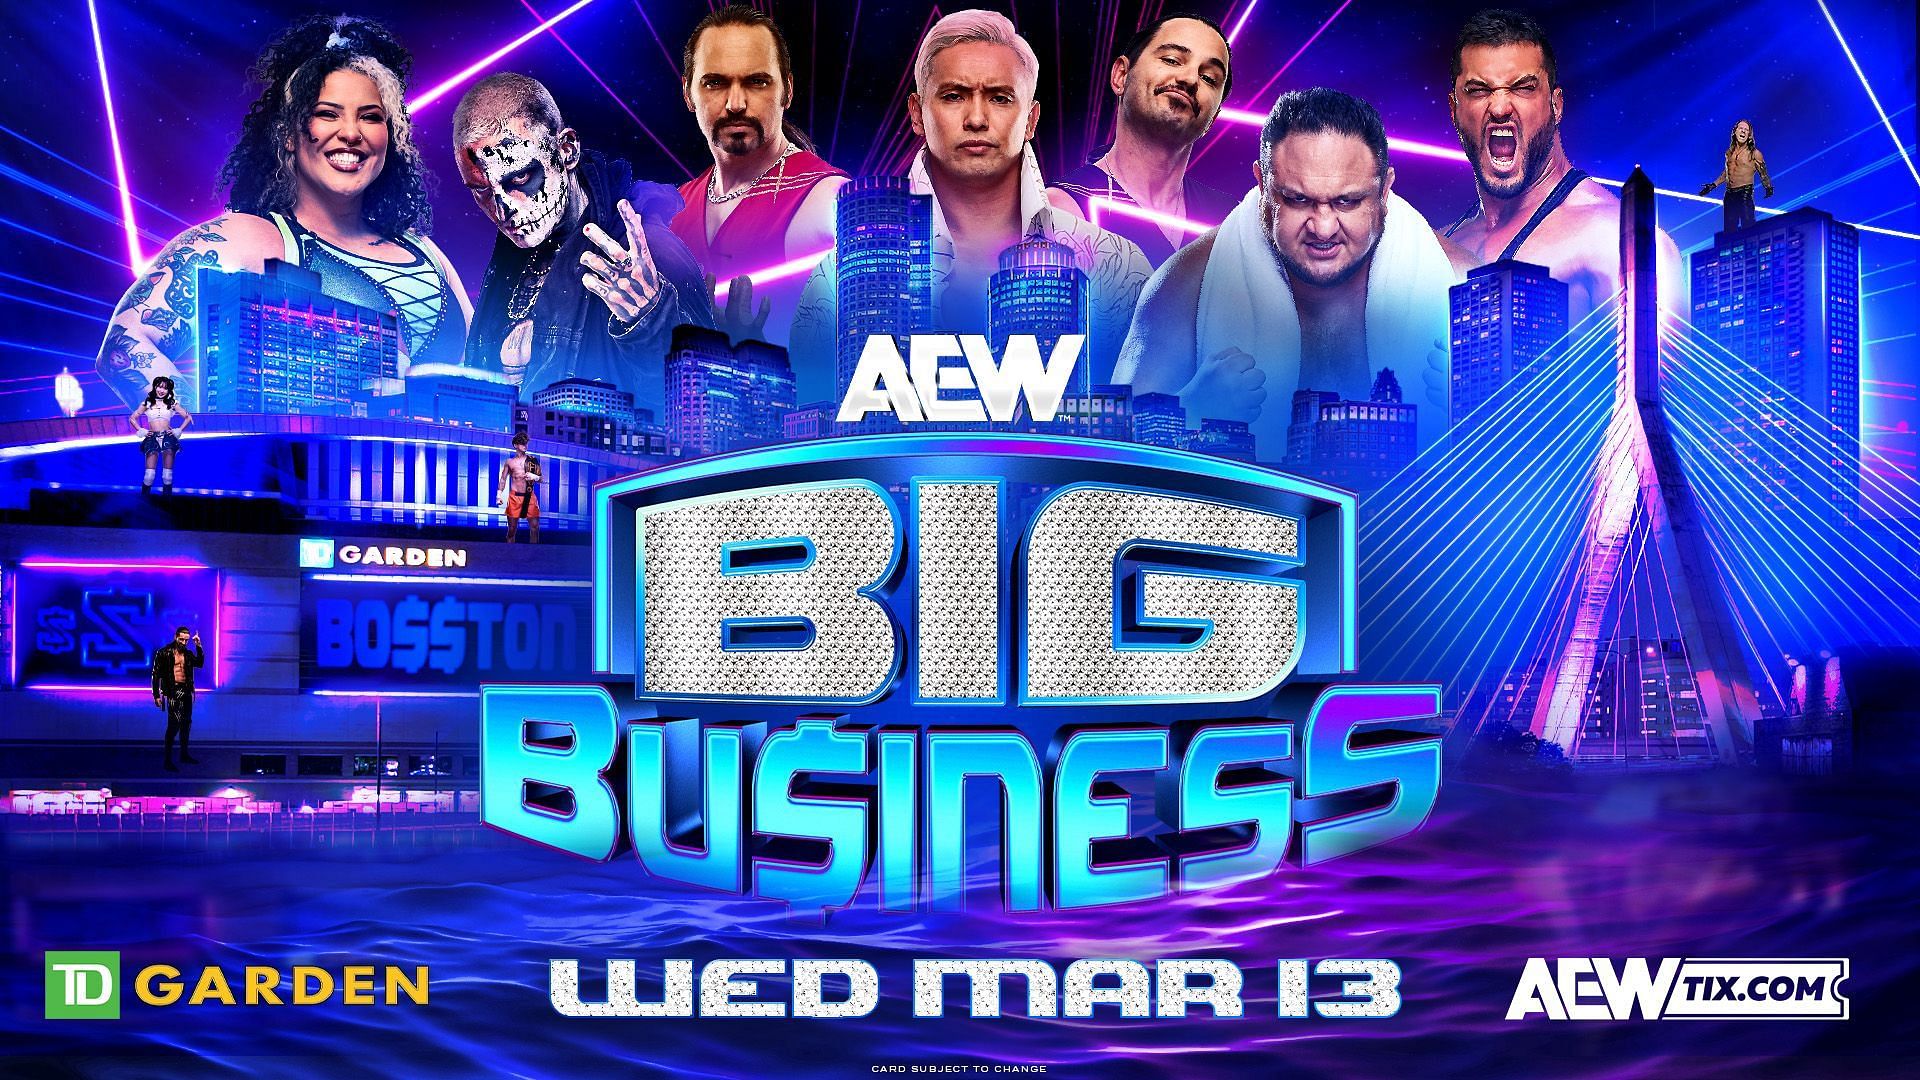 The official promotional poster for AEW Dynamite: Big Business